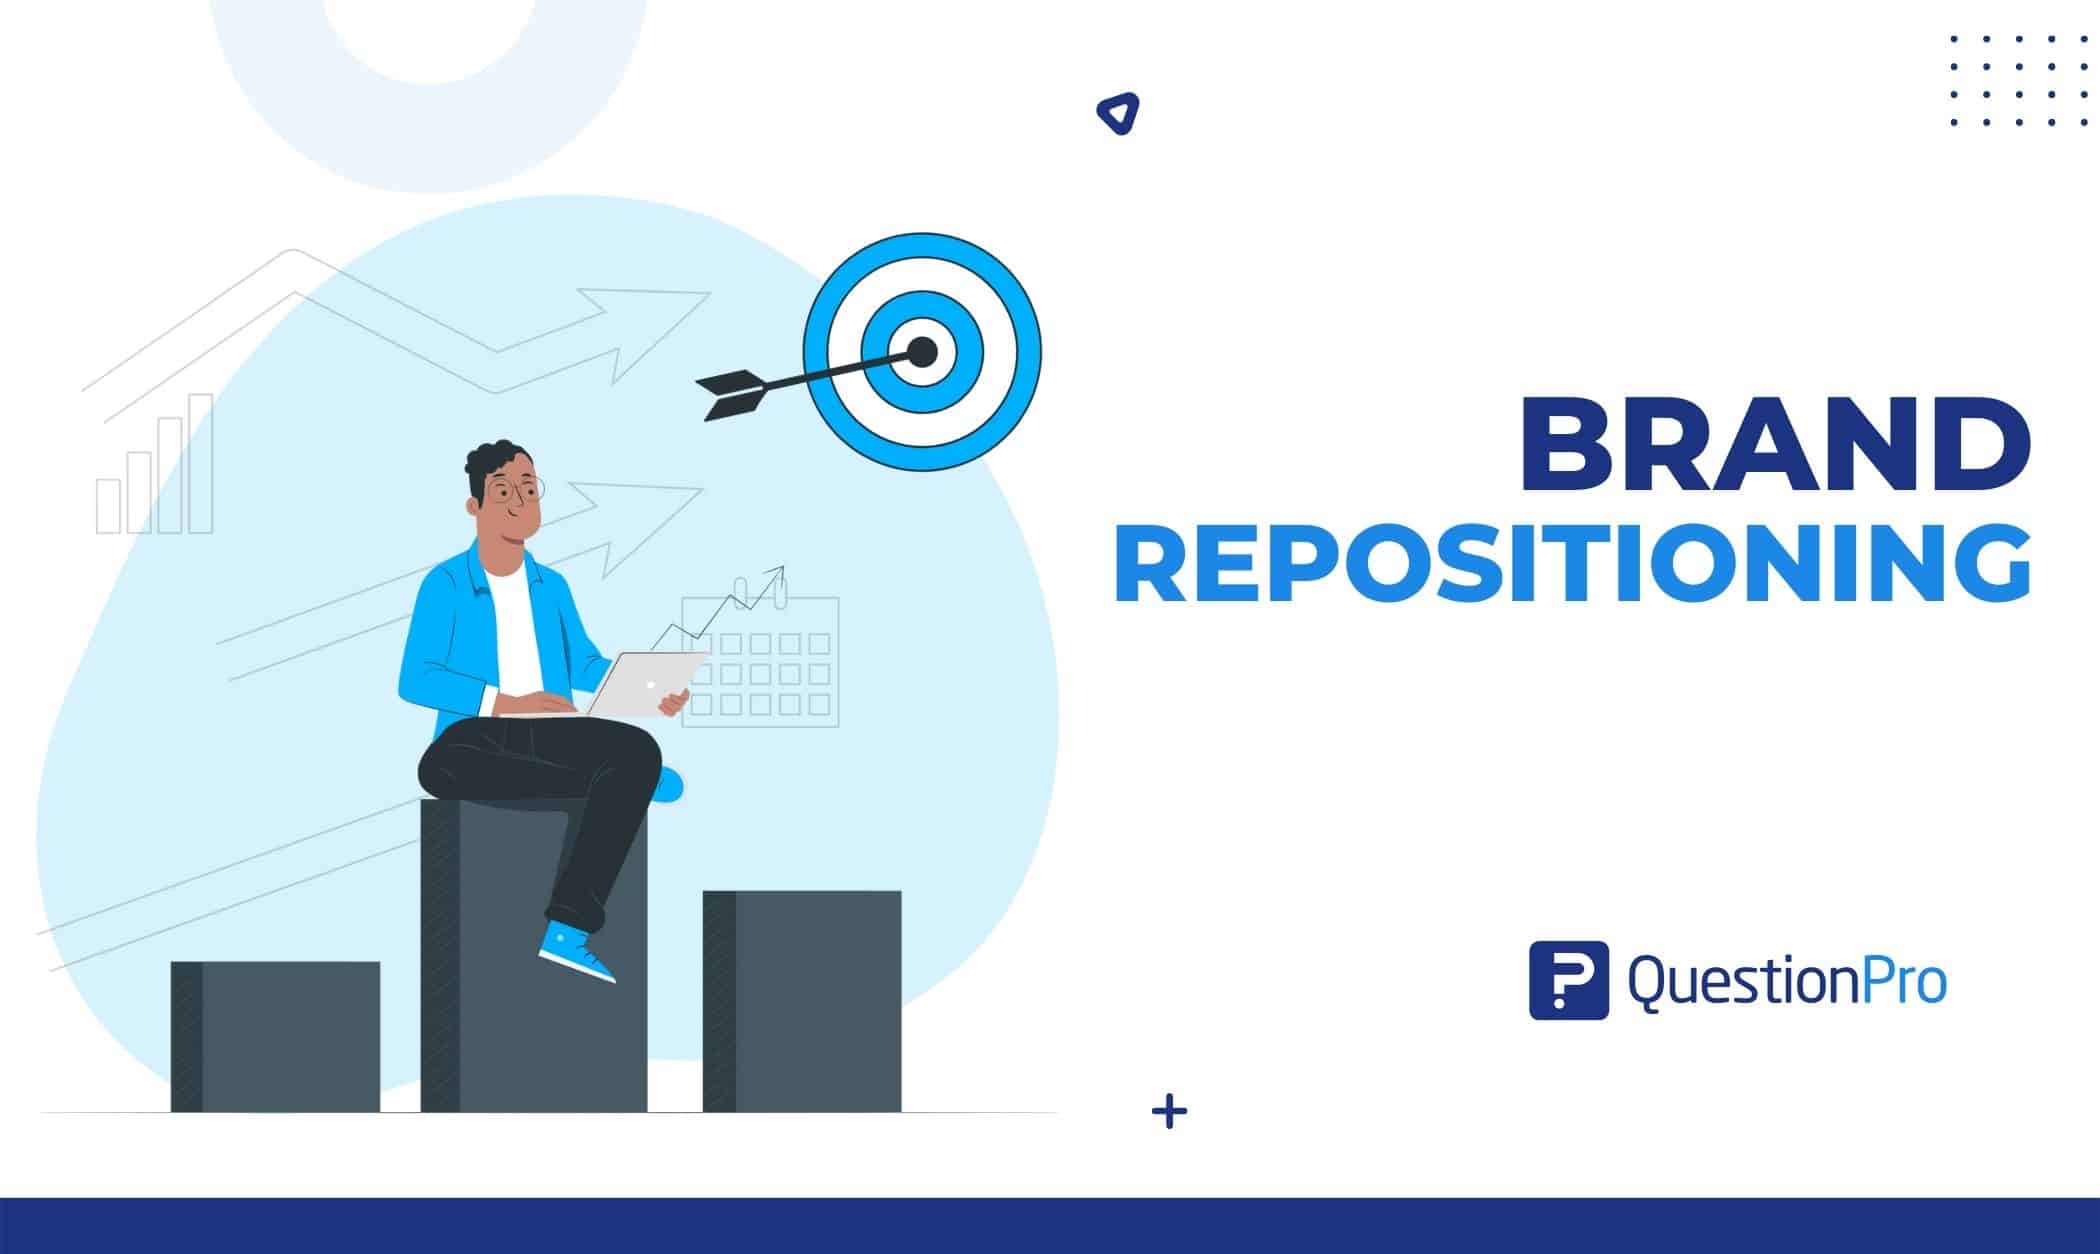 The brand repositioning aims to change how people perceive your business. Several methods exist for doing this. Learn more about how to do it.